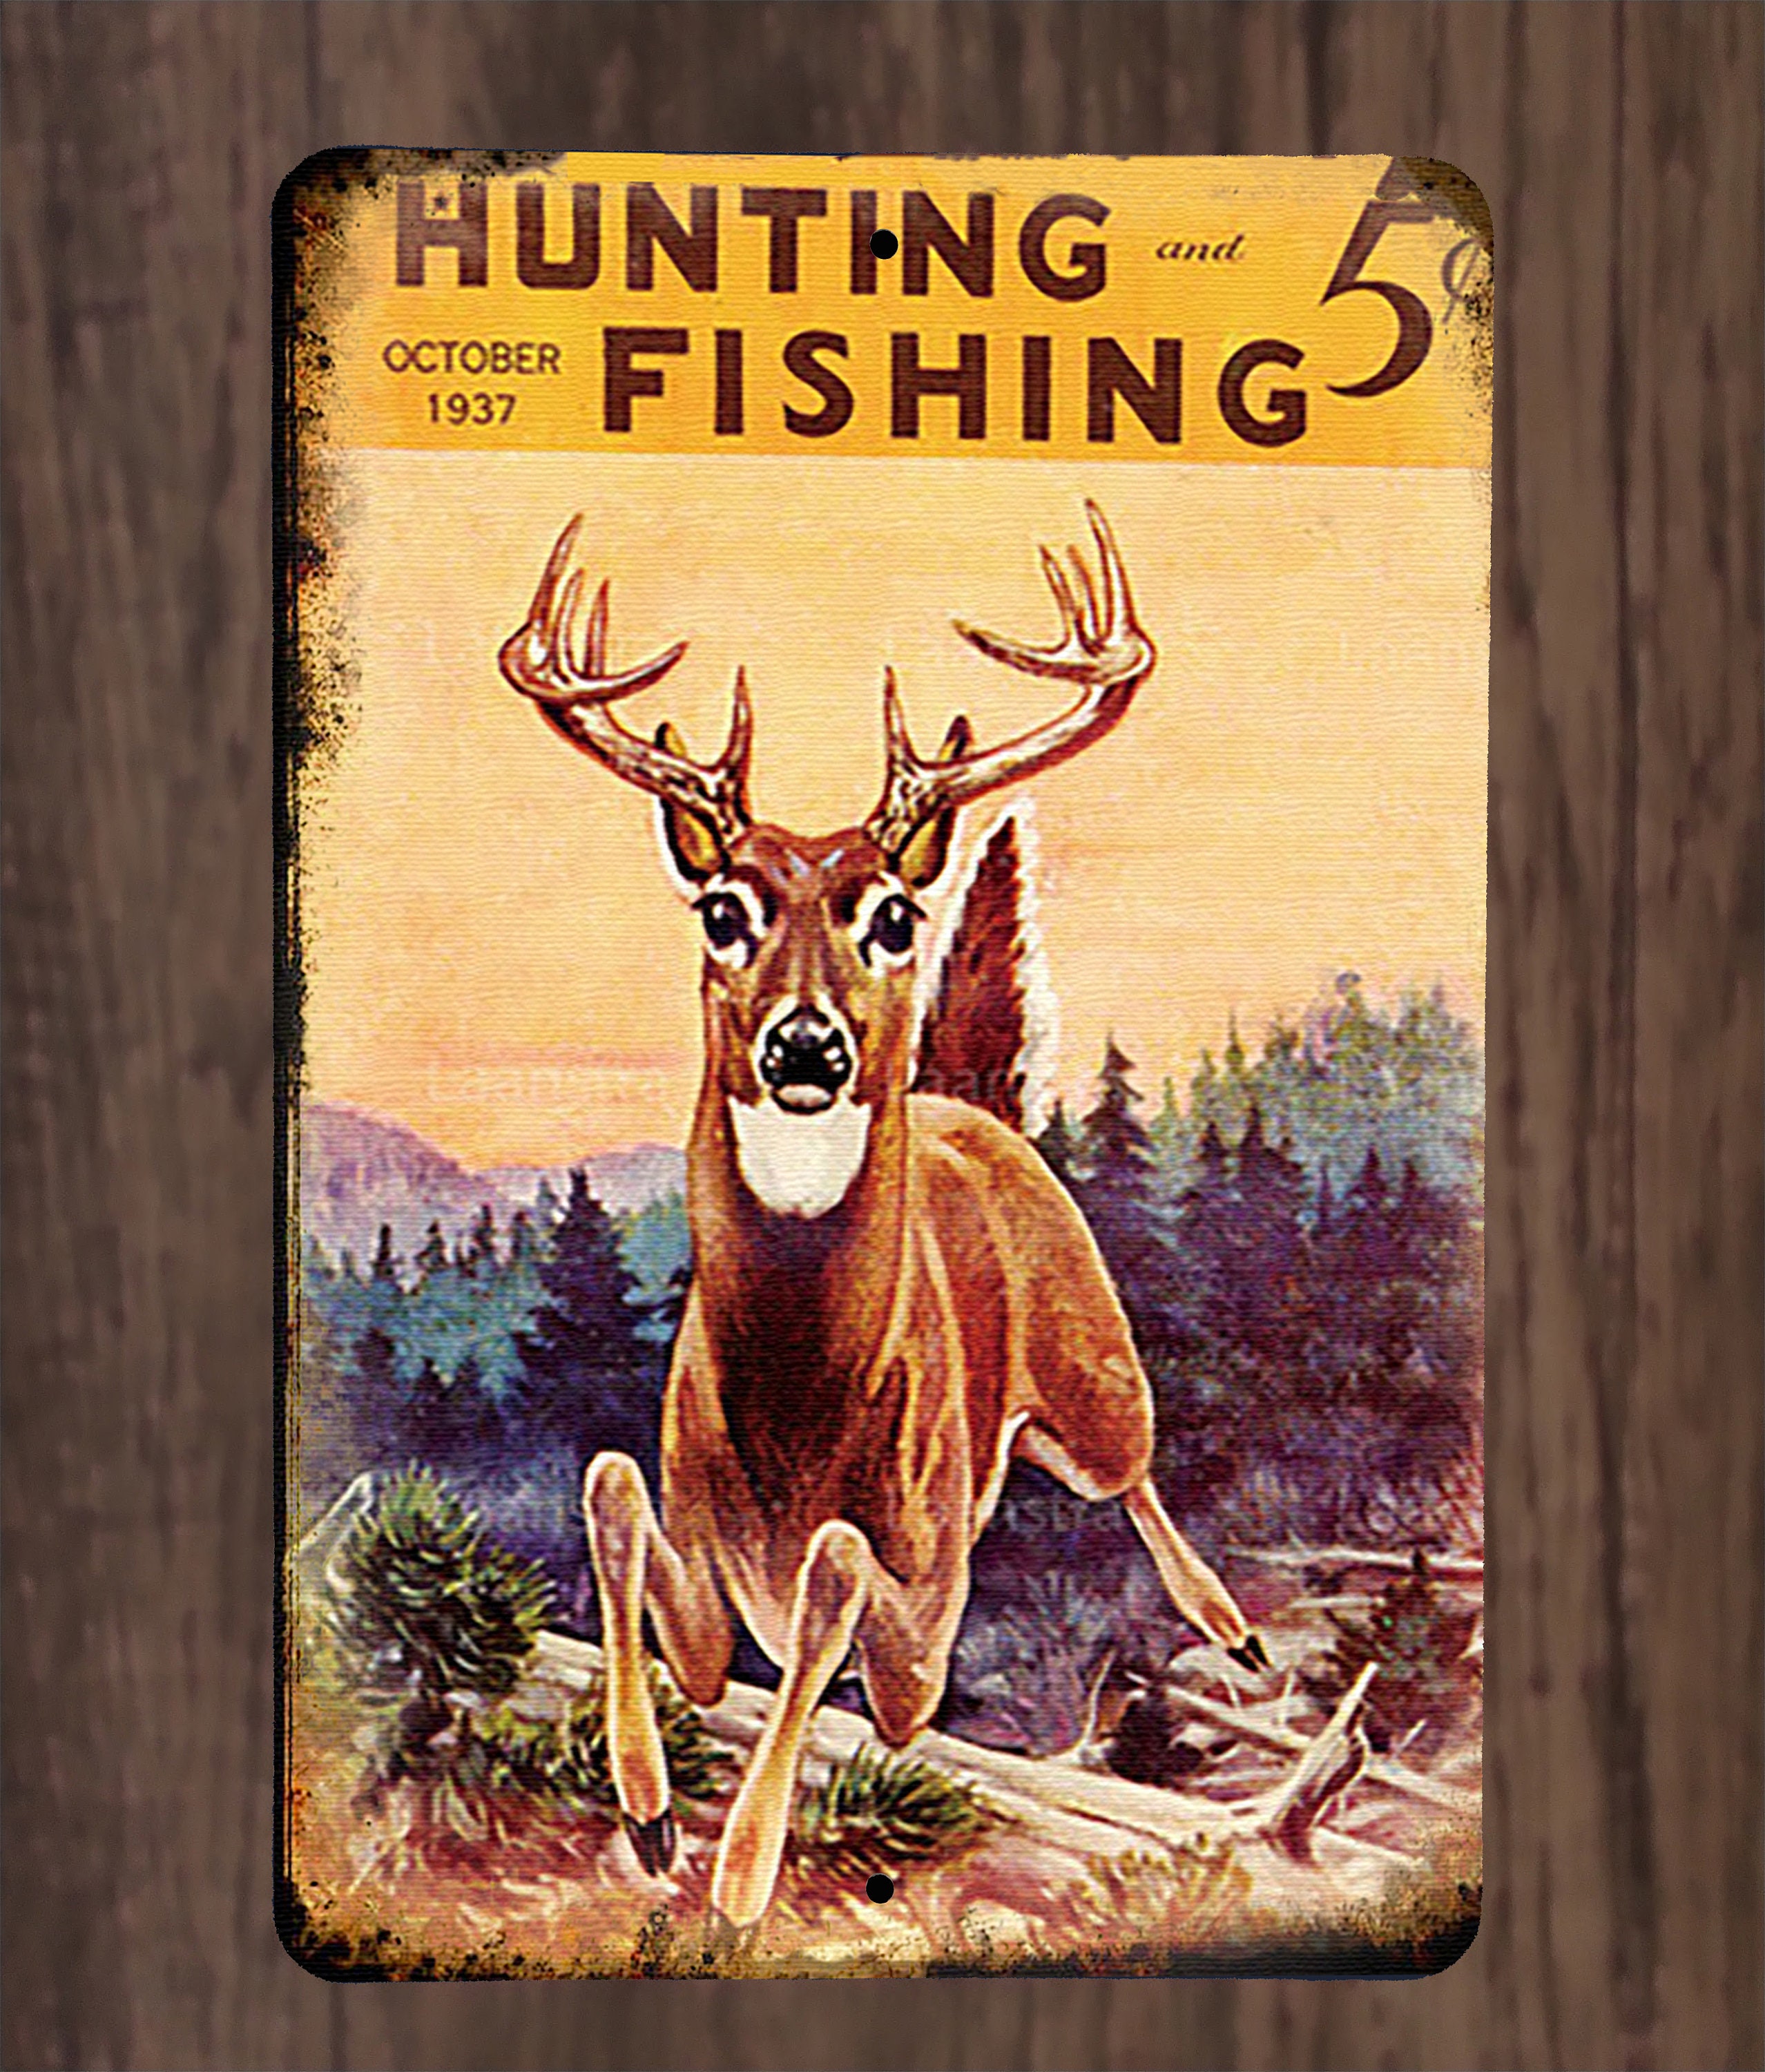 1937 Hunting and Fishing Cover Metal Poster with Deer